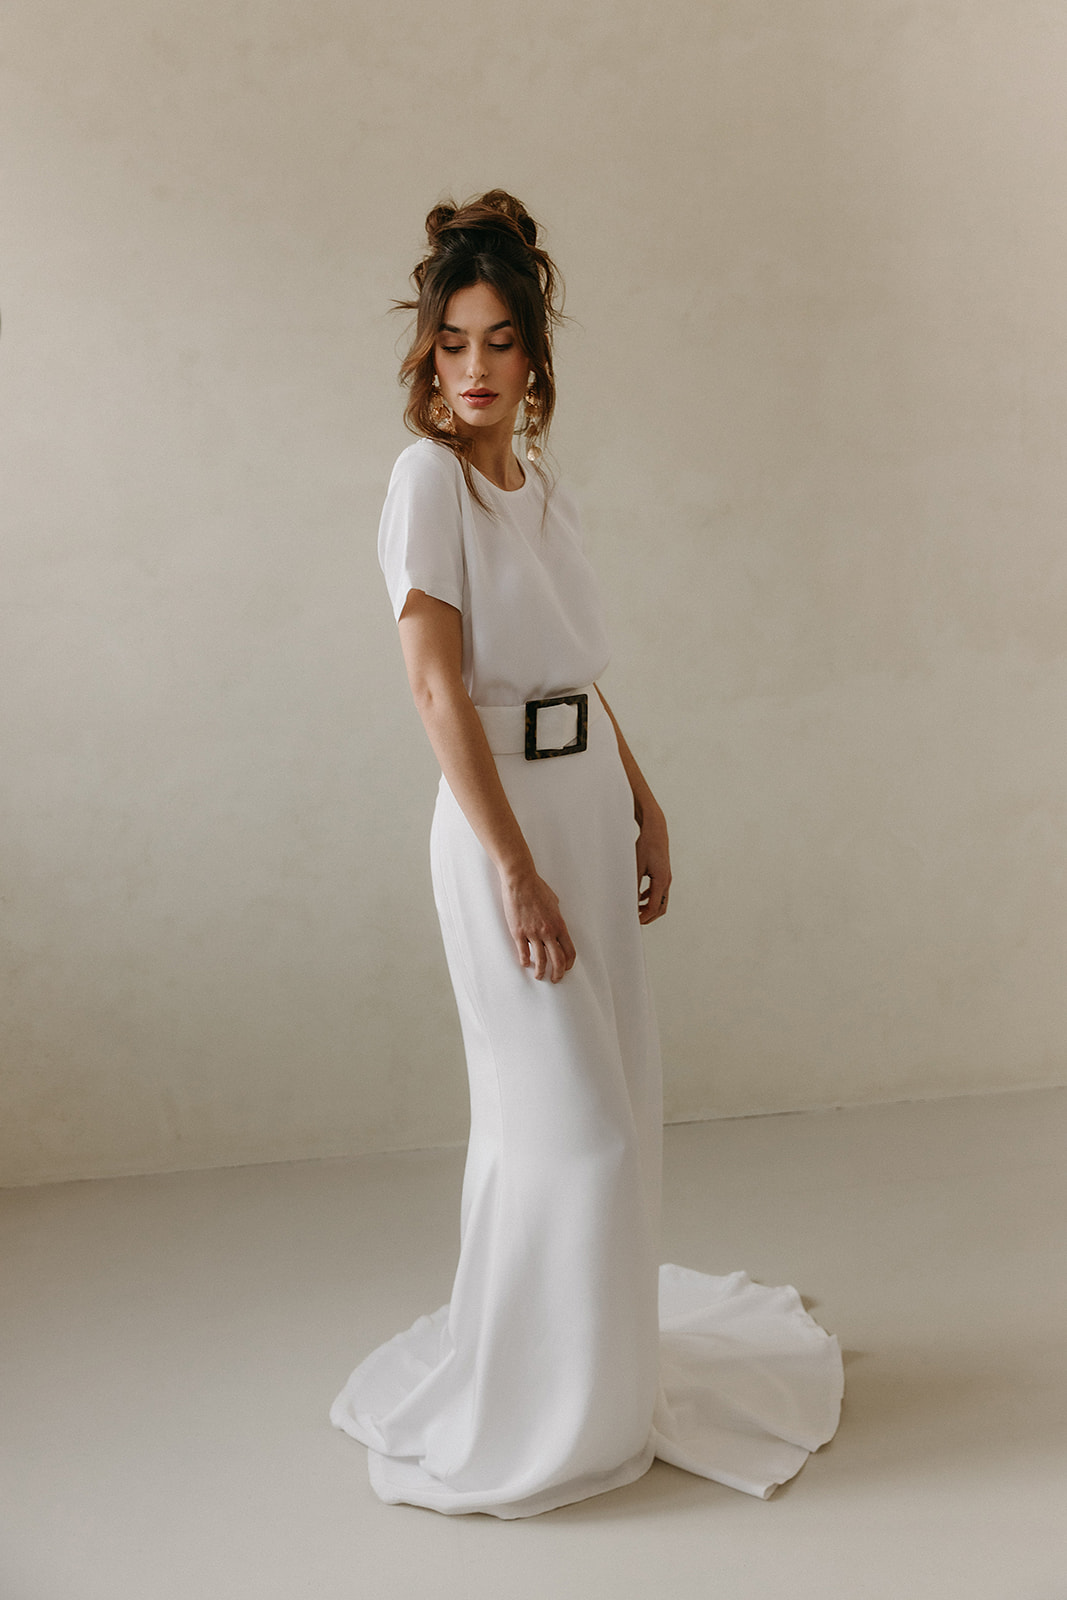 classy and minimal bridal t-shirt top and skirt with a belt